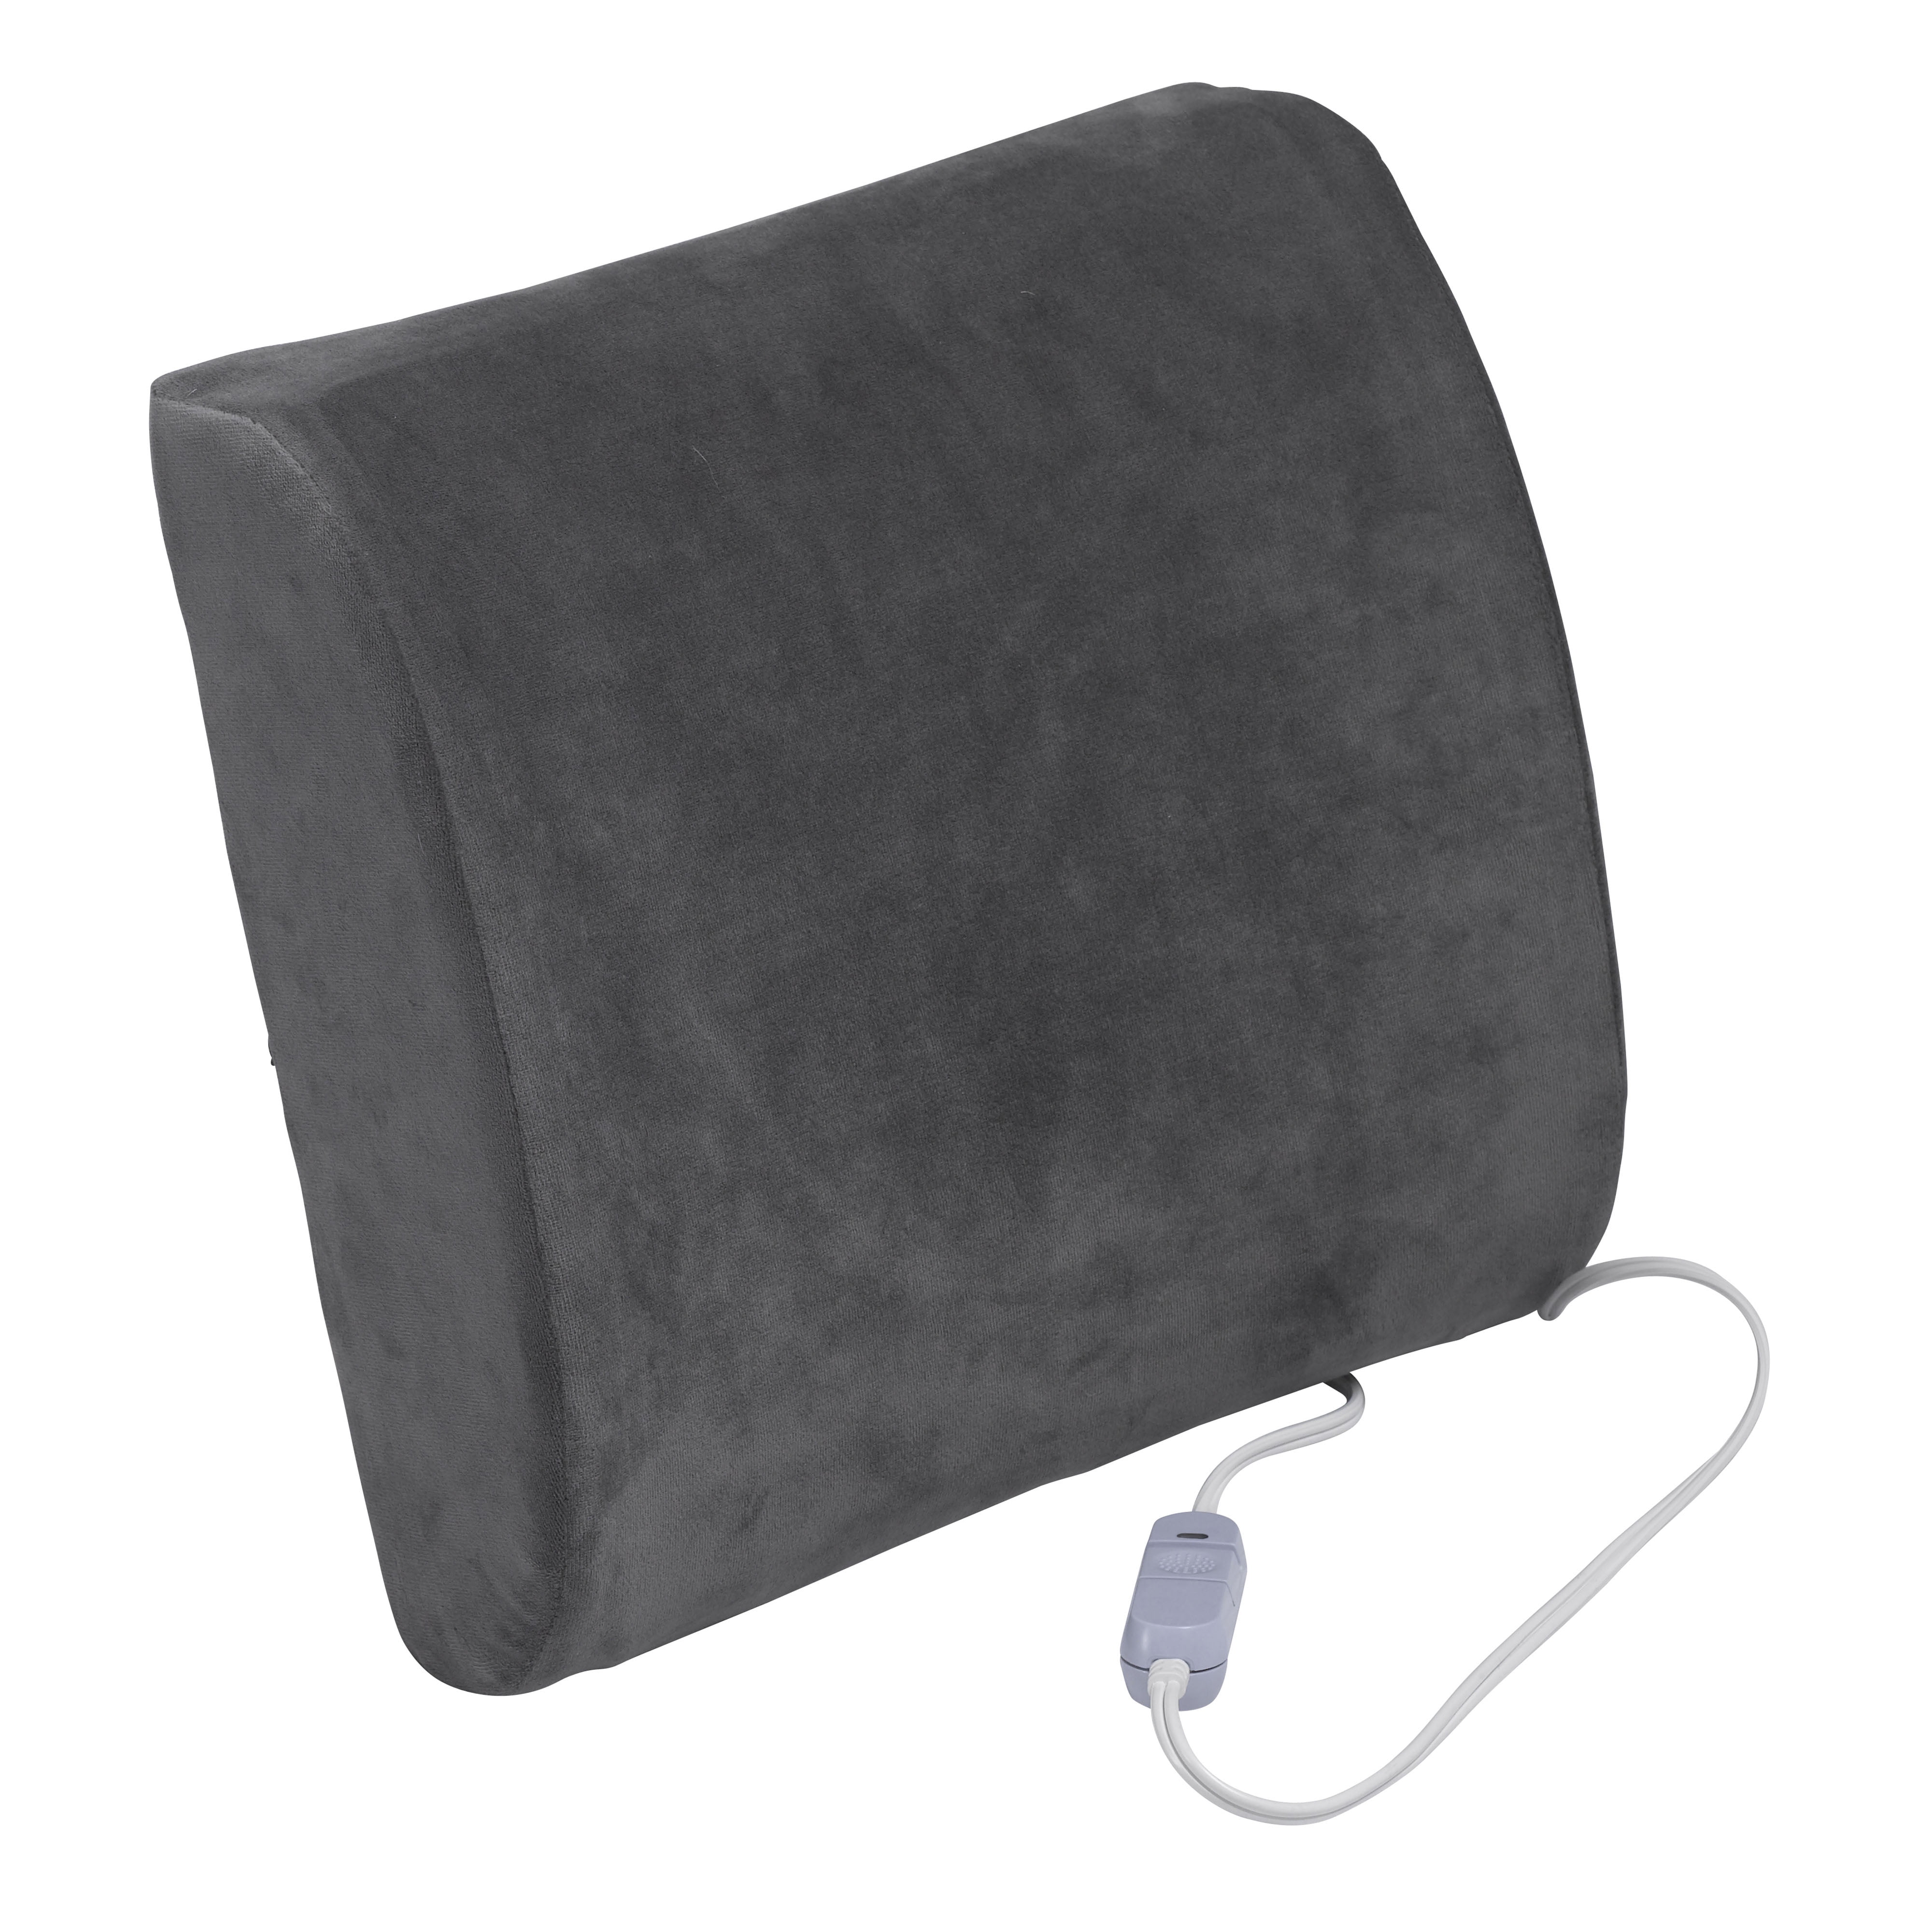 Picture of Drive Medical rtl2017ctl Comfort Touch Heated Lumbar Support Cushion